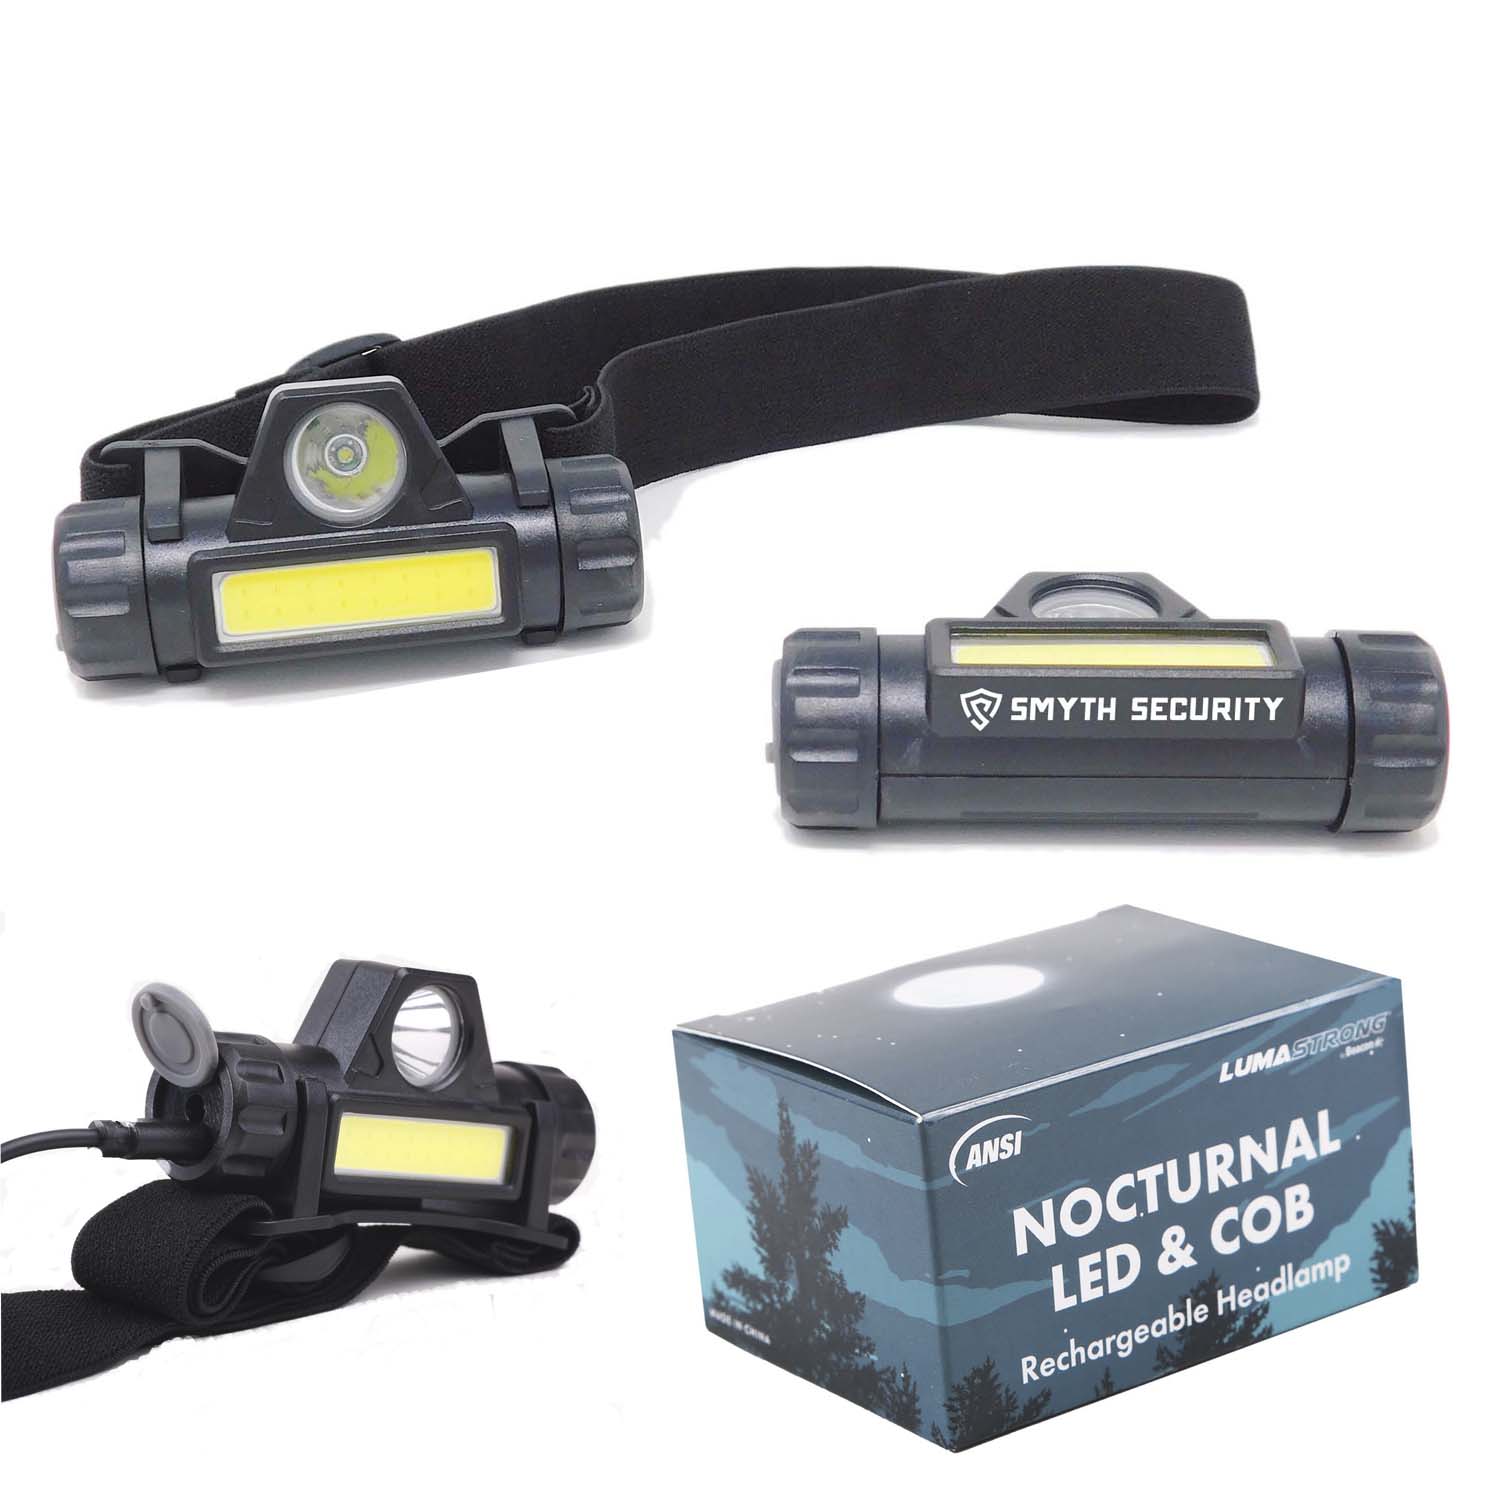 Rechargeable LED and COB Headlamp